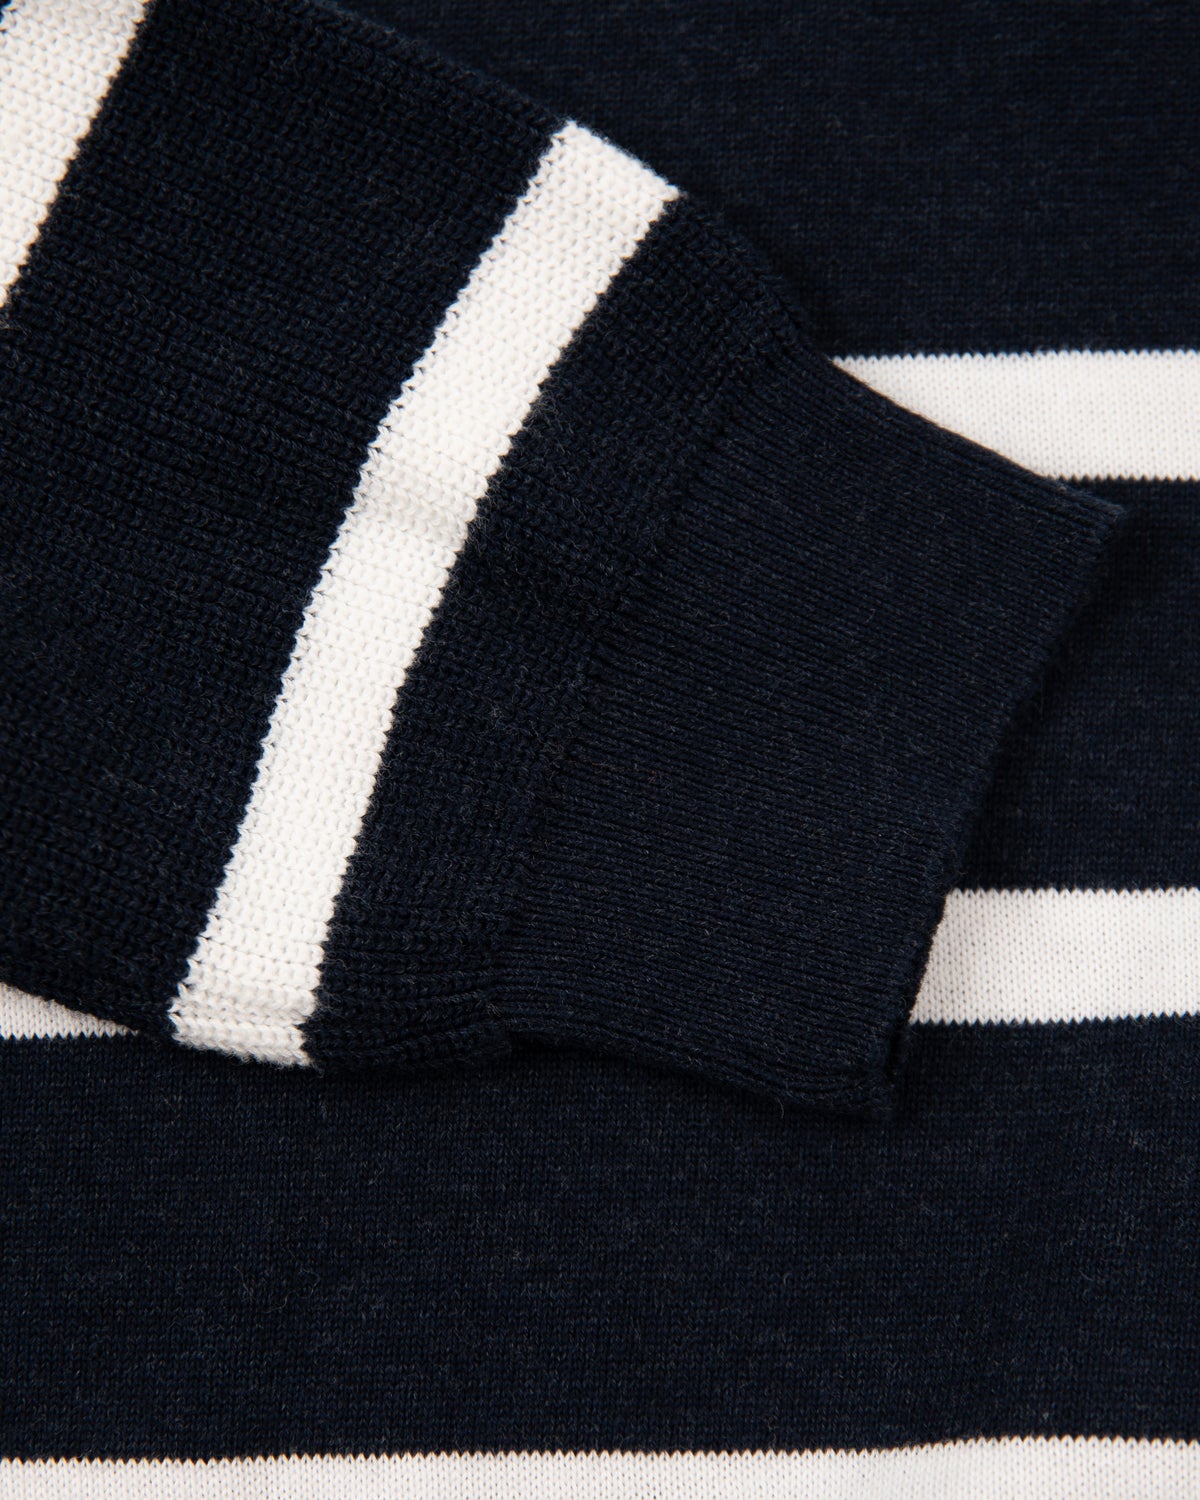 Rugby Shirt blue - Charcoal Navy